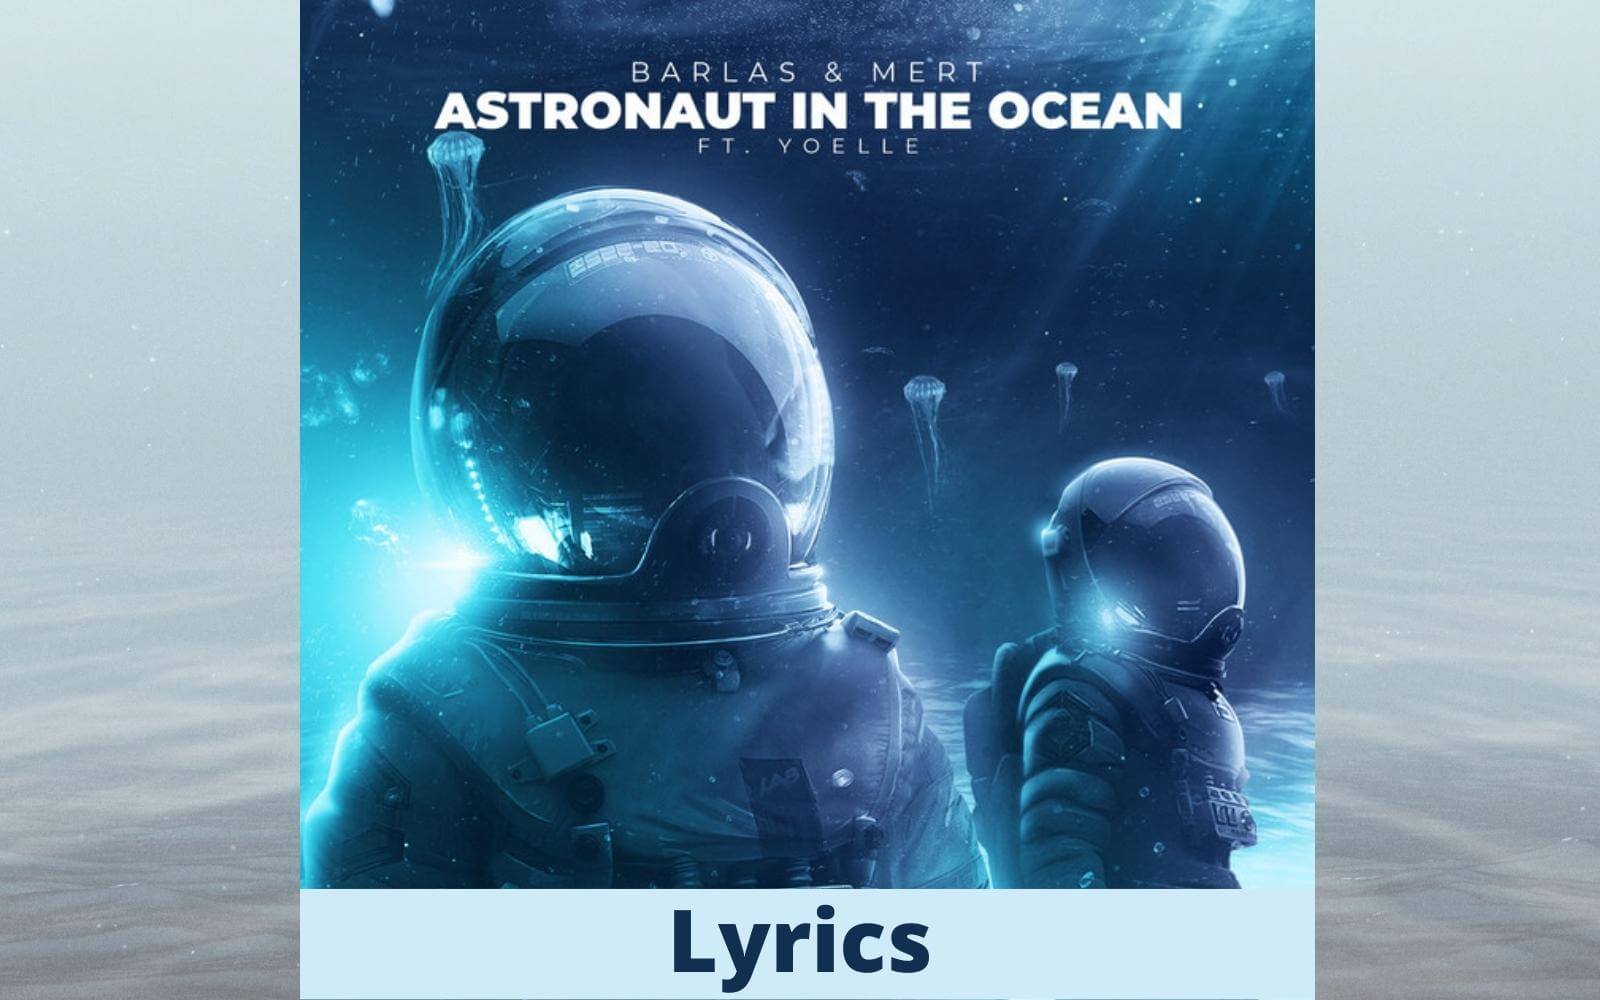 What You Know About Rolling In The Deep - Astronaut in the Ocean - Lyrics